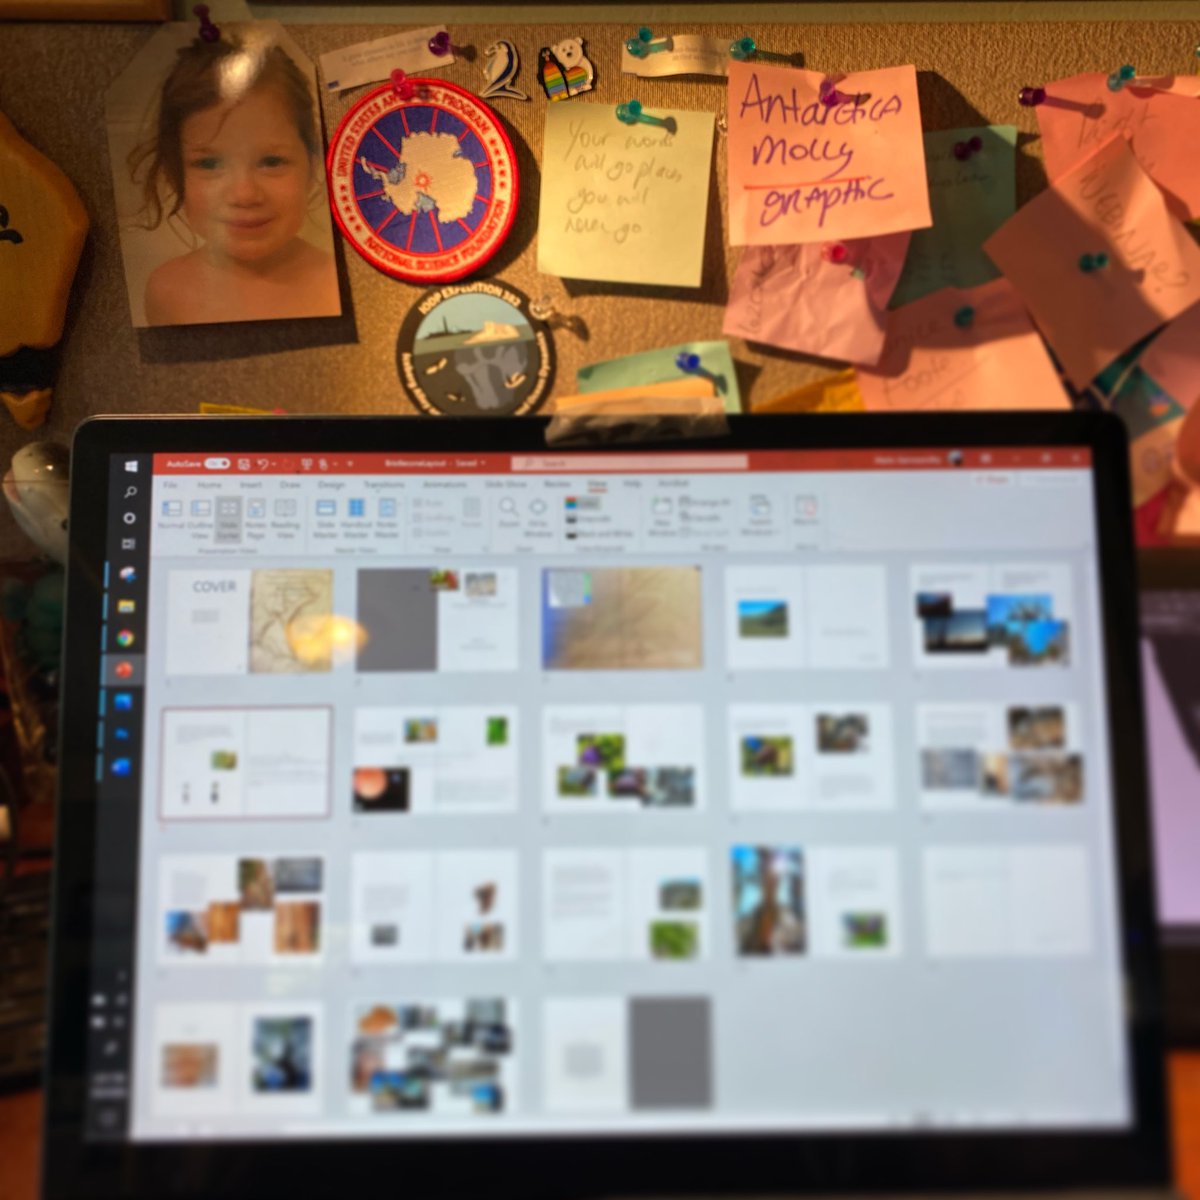 8/ Meanwhile, I use good ole PowerPoint to do initial planning & pagination (dividing the text up) & add relevant reference pics. I’ve already put 2 very rough thumbnail sketches in. At this point, it’s a massive complex puzzle. Daunting but exciting.  #kidlitart  #sciart